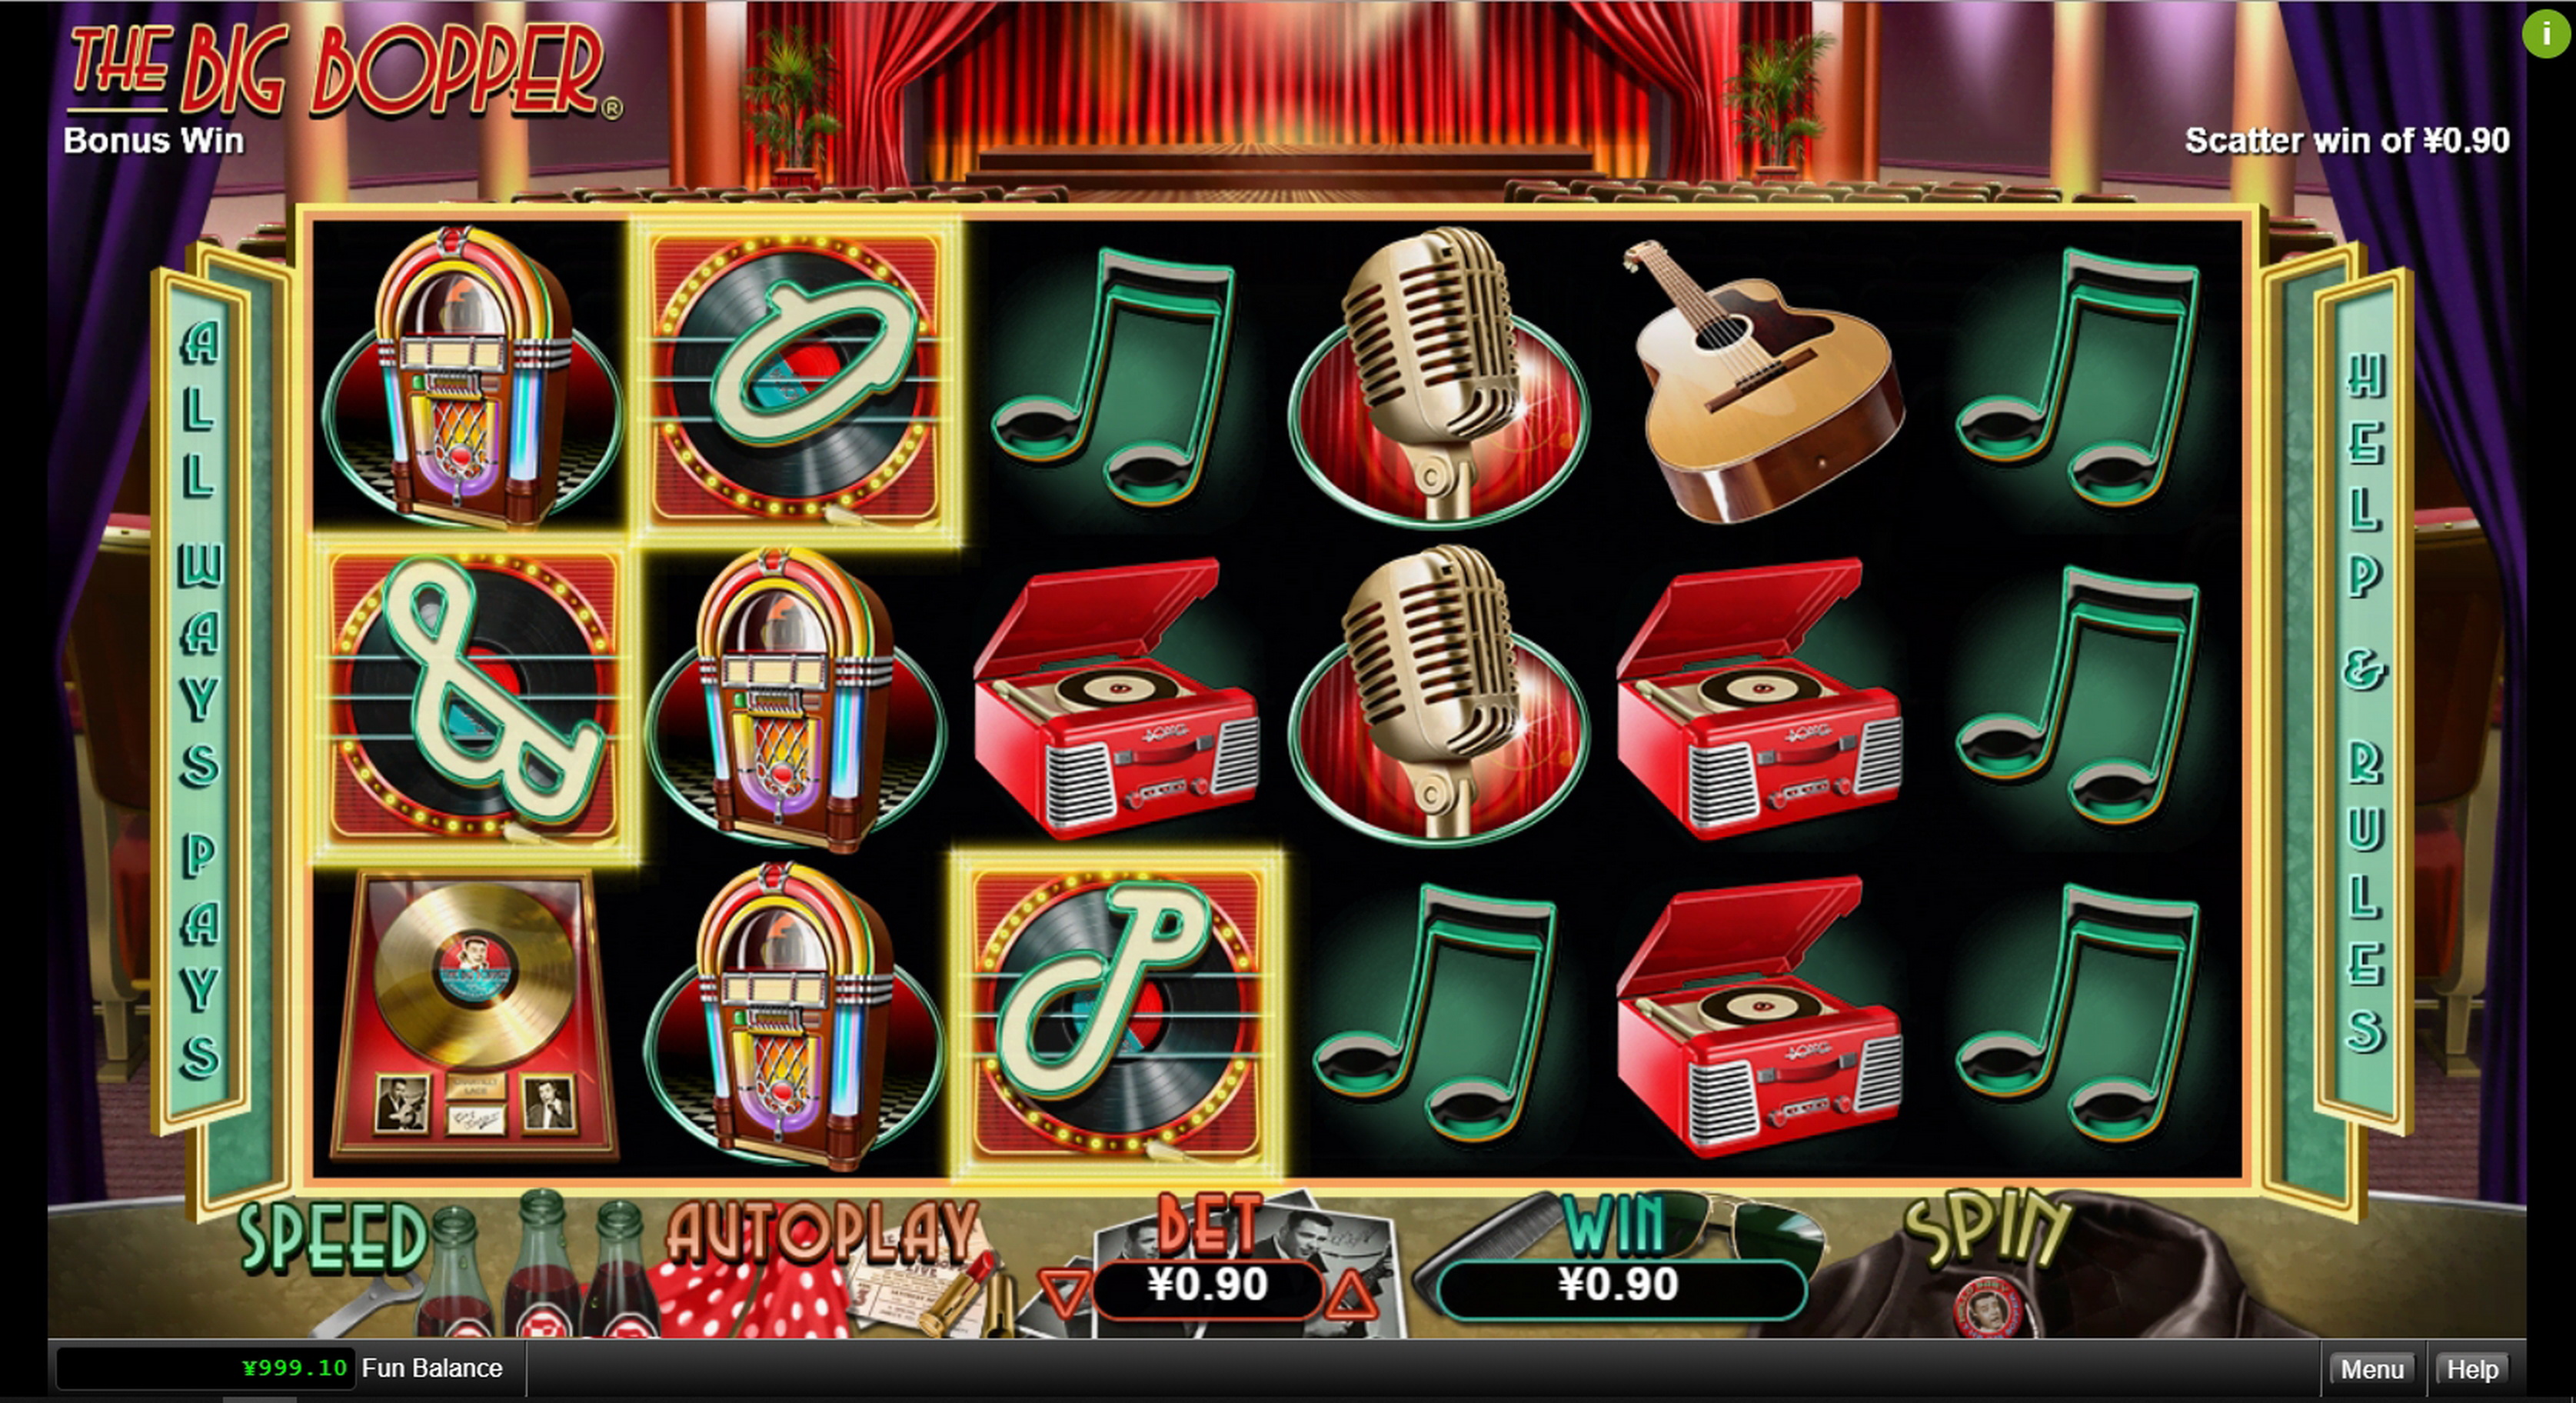 Win Money in The Big Bopper Free Slot Game by Real Time Gaming